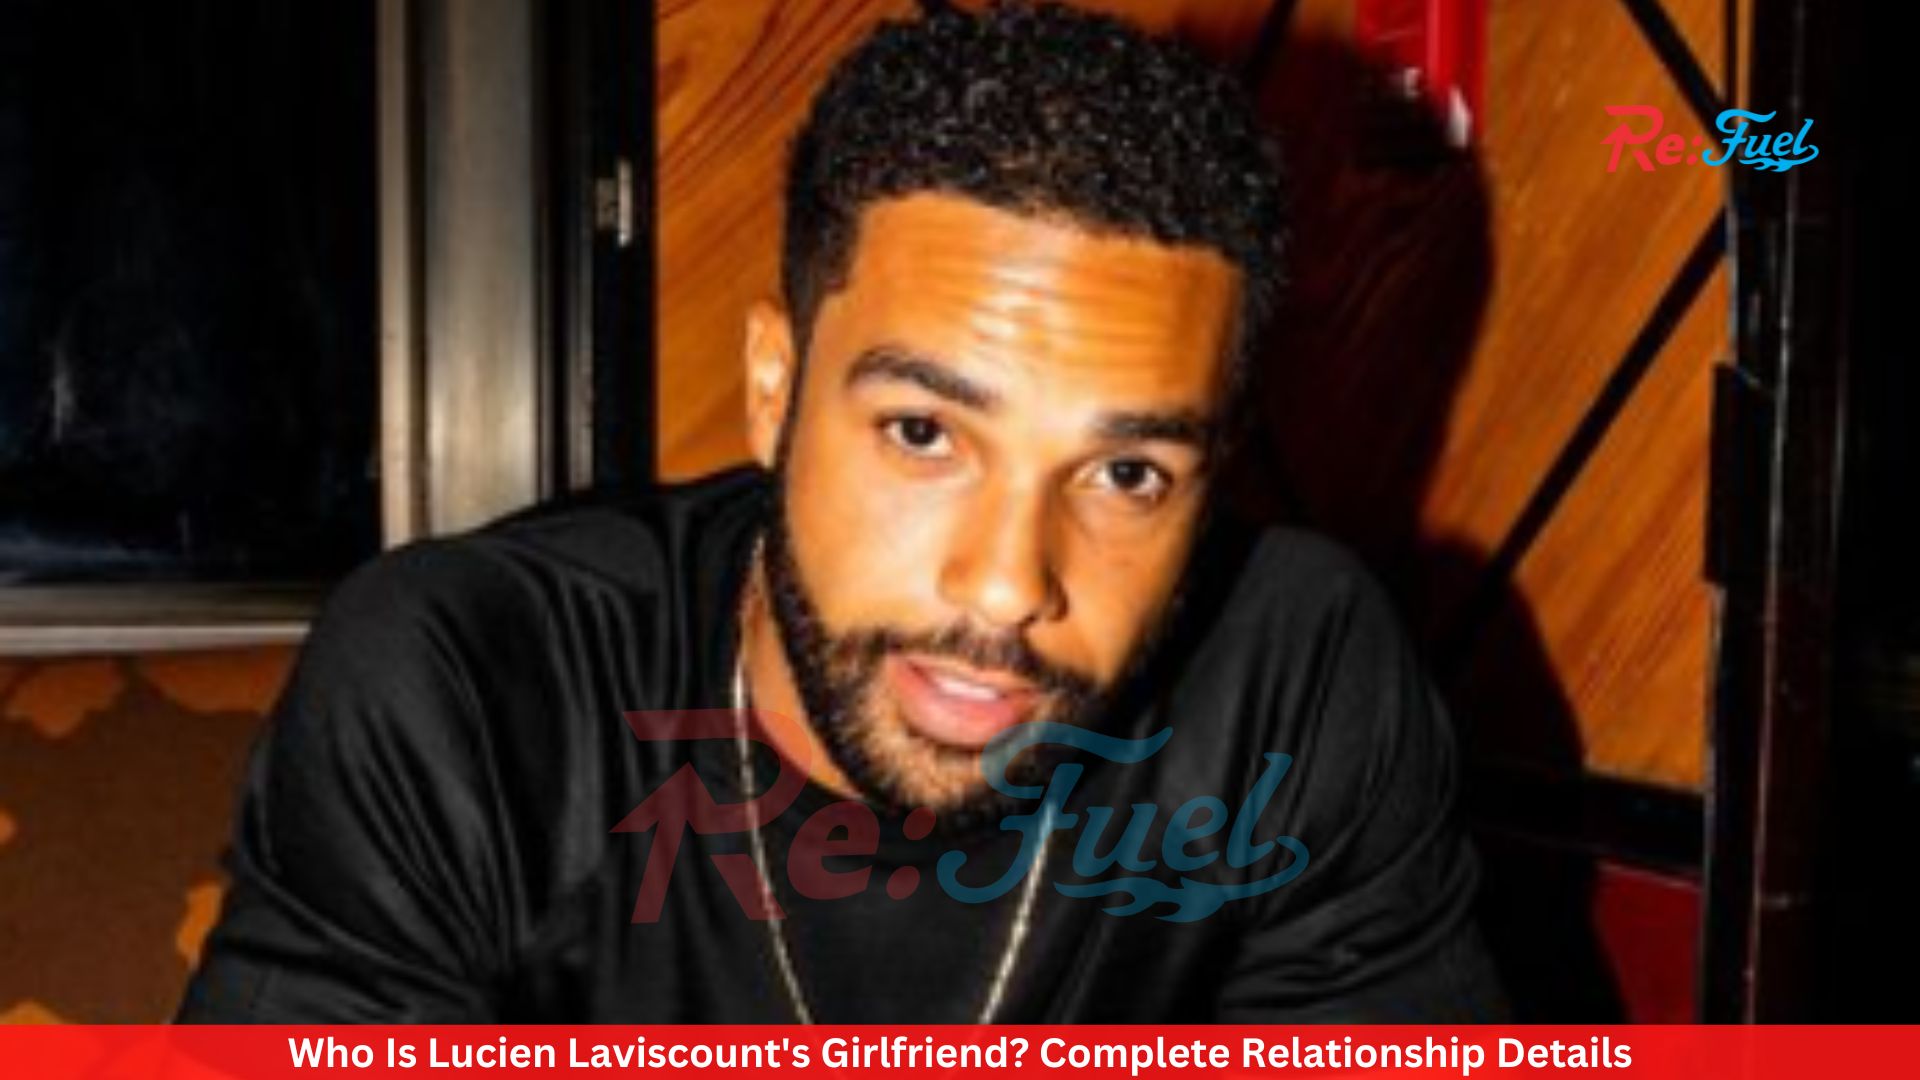 Who Is Lucien Laviscount's Girlfriend? Complete Relationship Details